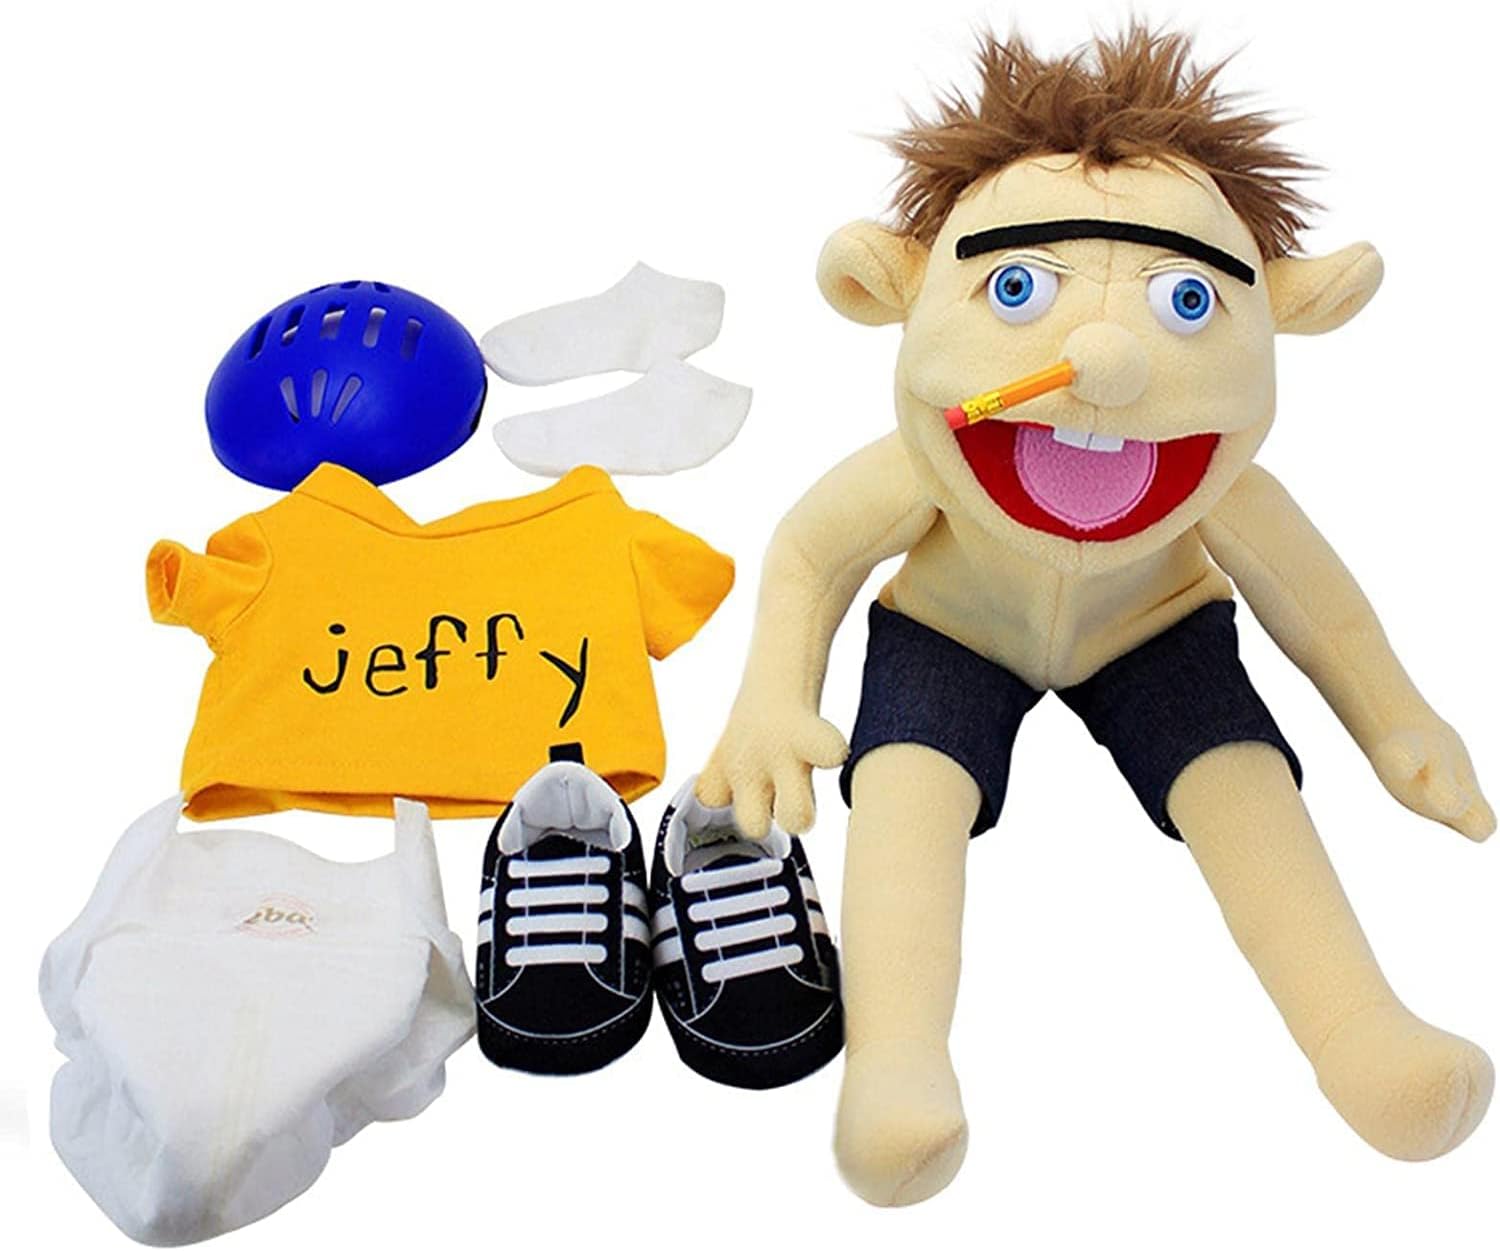 Jeffy Puppet Plush Toy Doll, 60cm Hand Puppet,Mischievous Funny Puppets Toy With Working Mouth, For Birthday Christmas Halloween Party Teaching Preschool